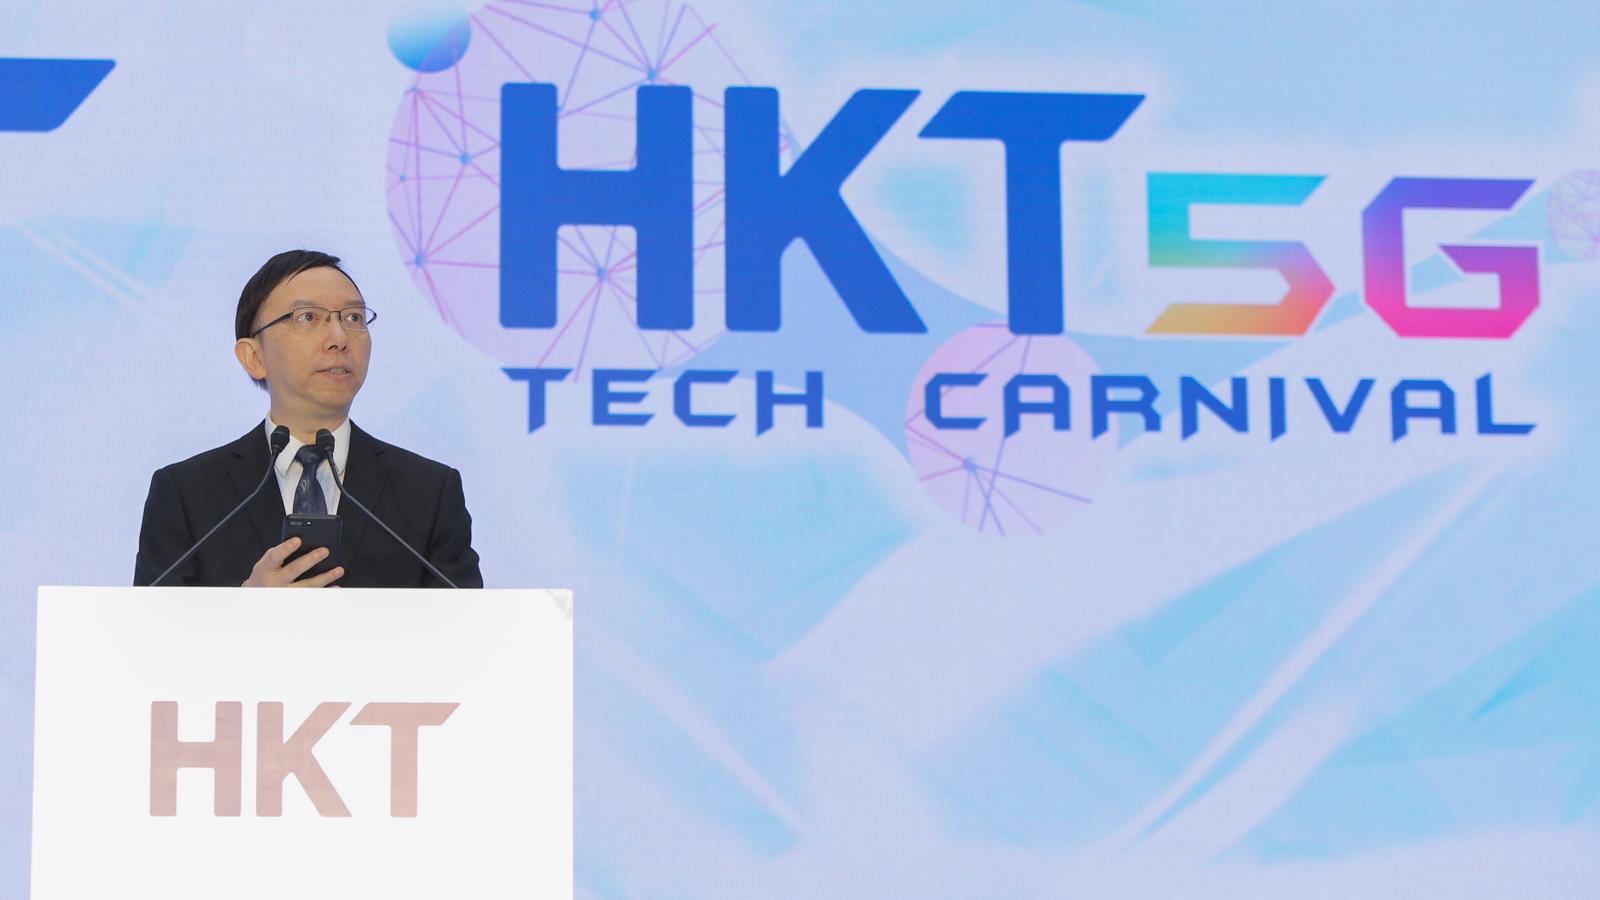 Mr. Victor Lam, Government Chief Information Officer, delivers Speech at the "HKT 5G Tech Carnival".